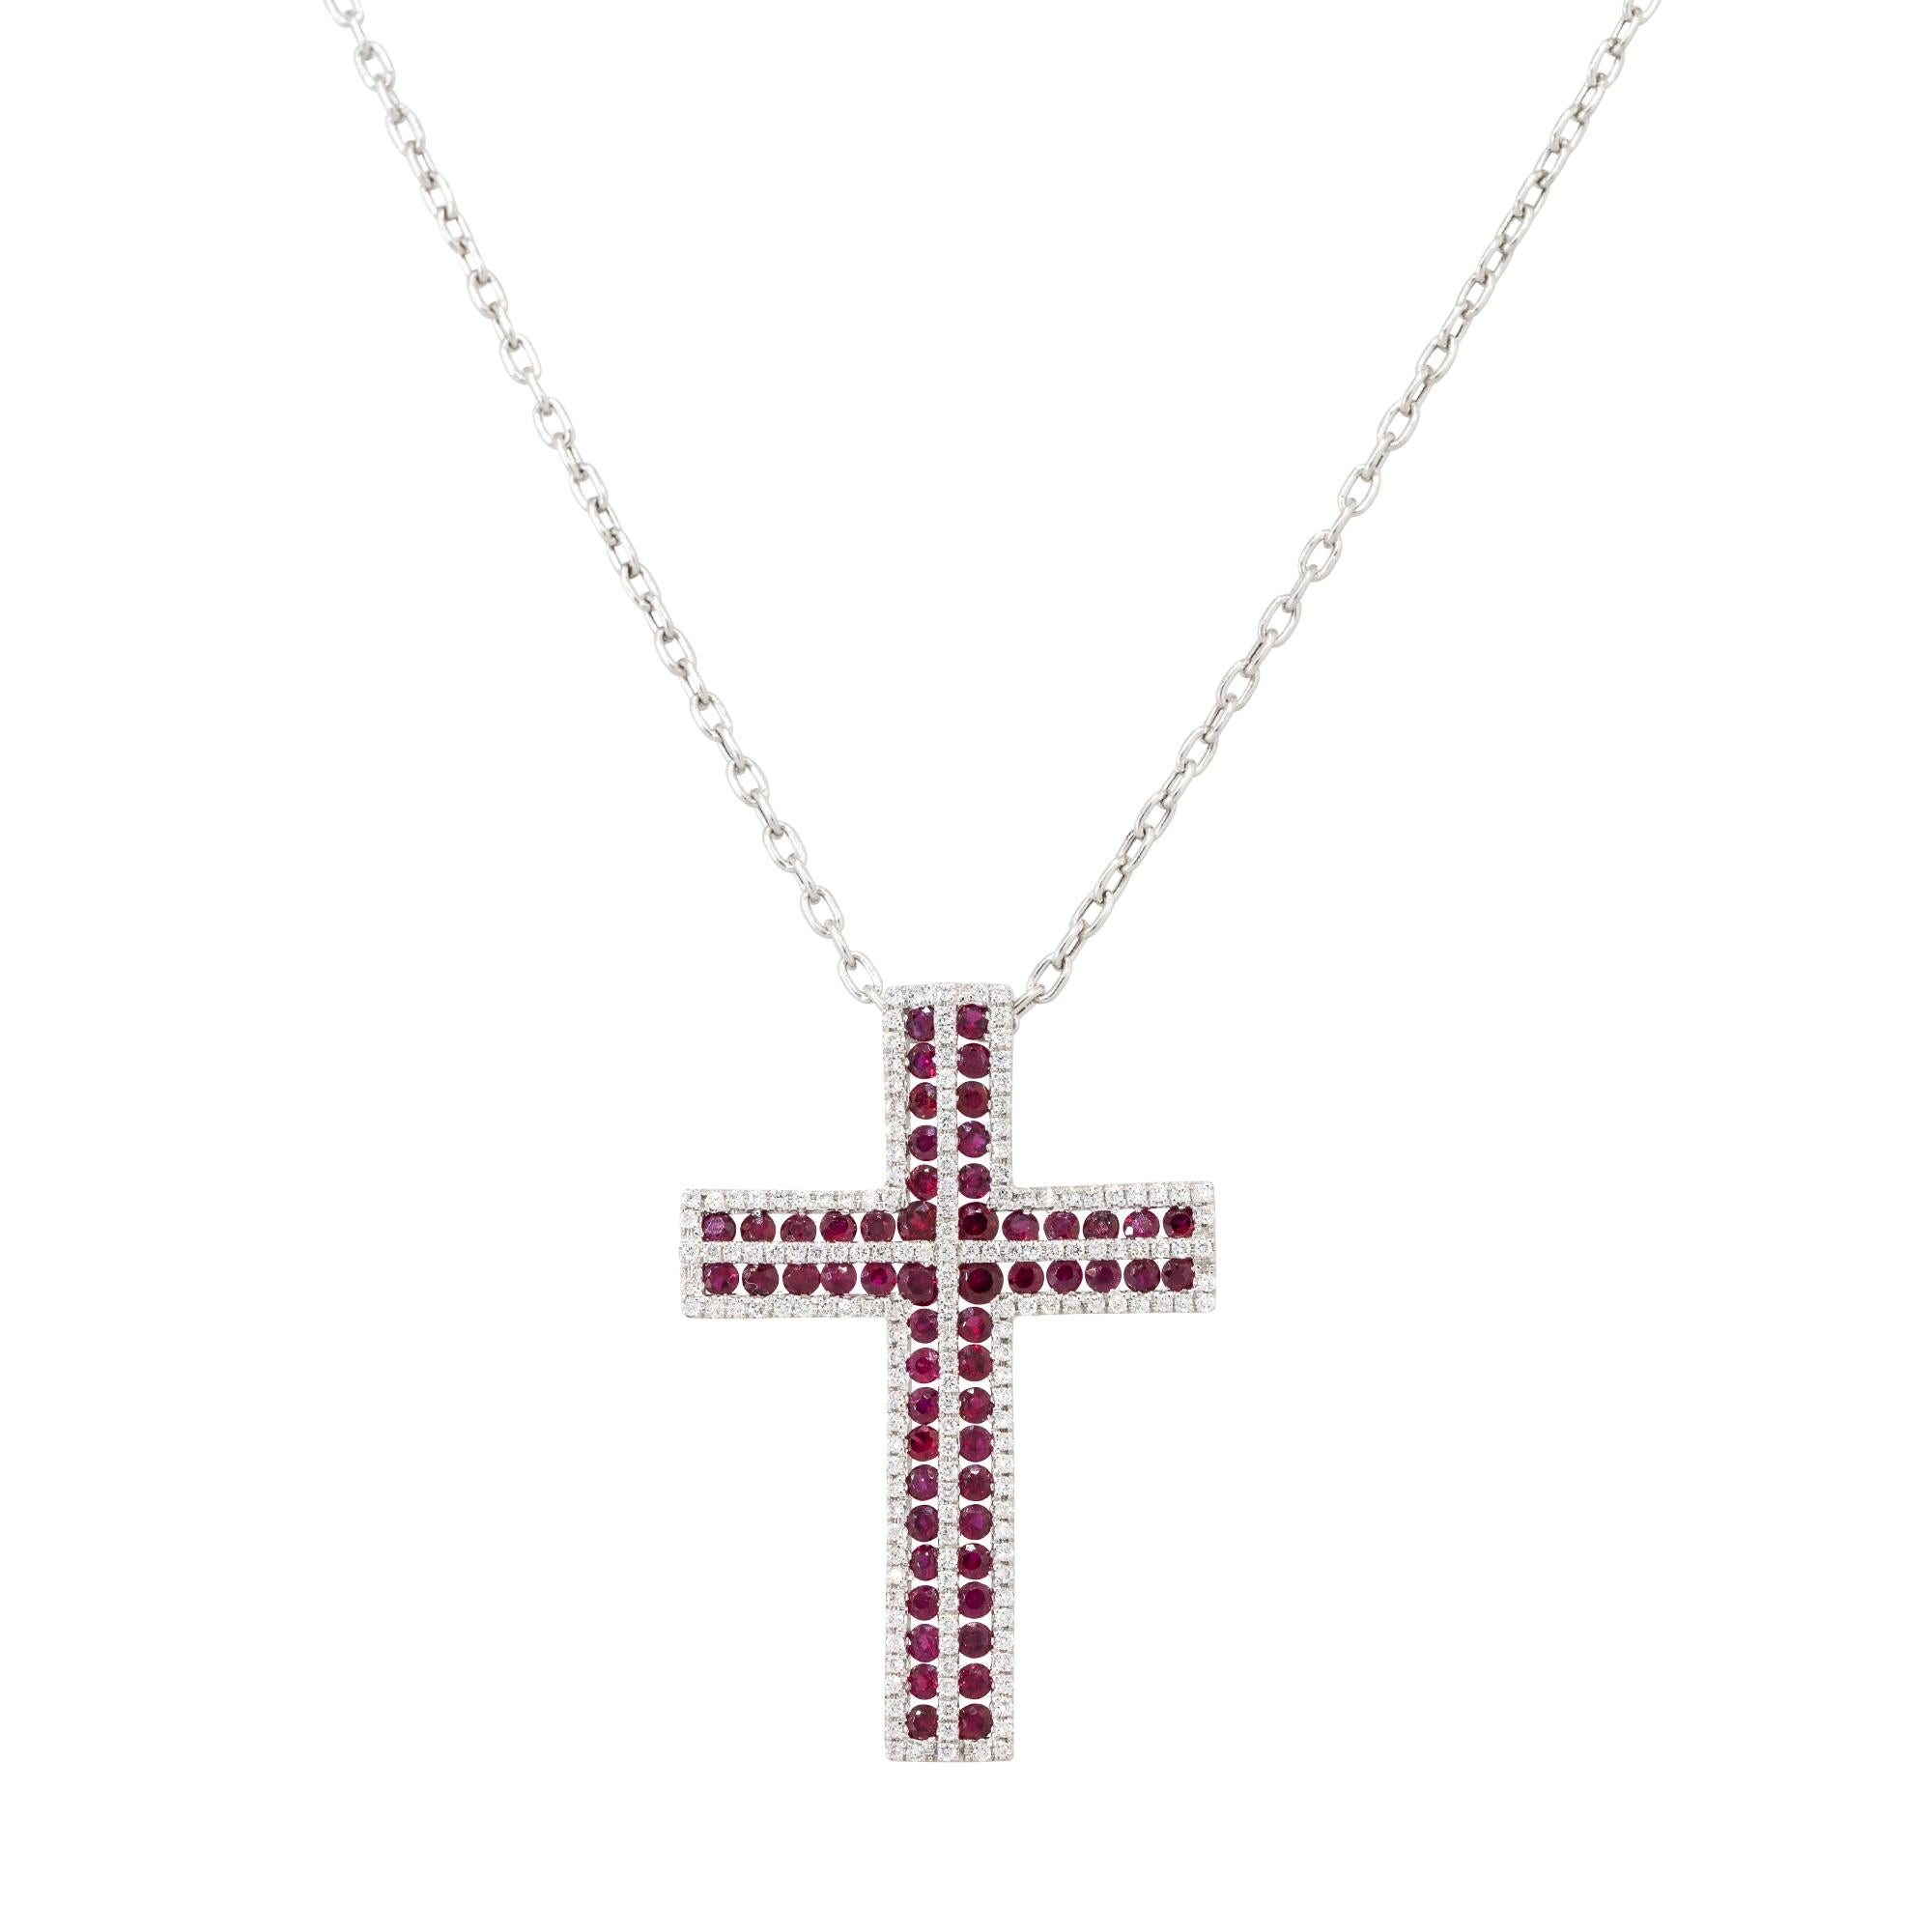 Round Cut Diamond & Ruby Pave Cross Pendant Necklace 18 Karat In Stock For Sale